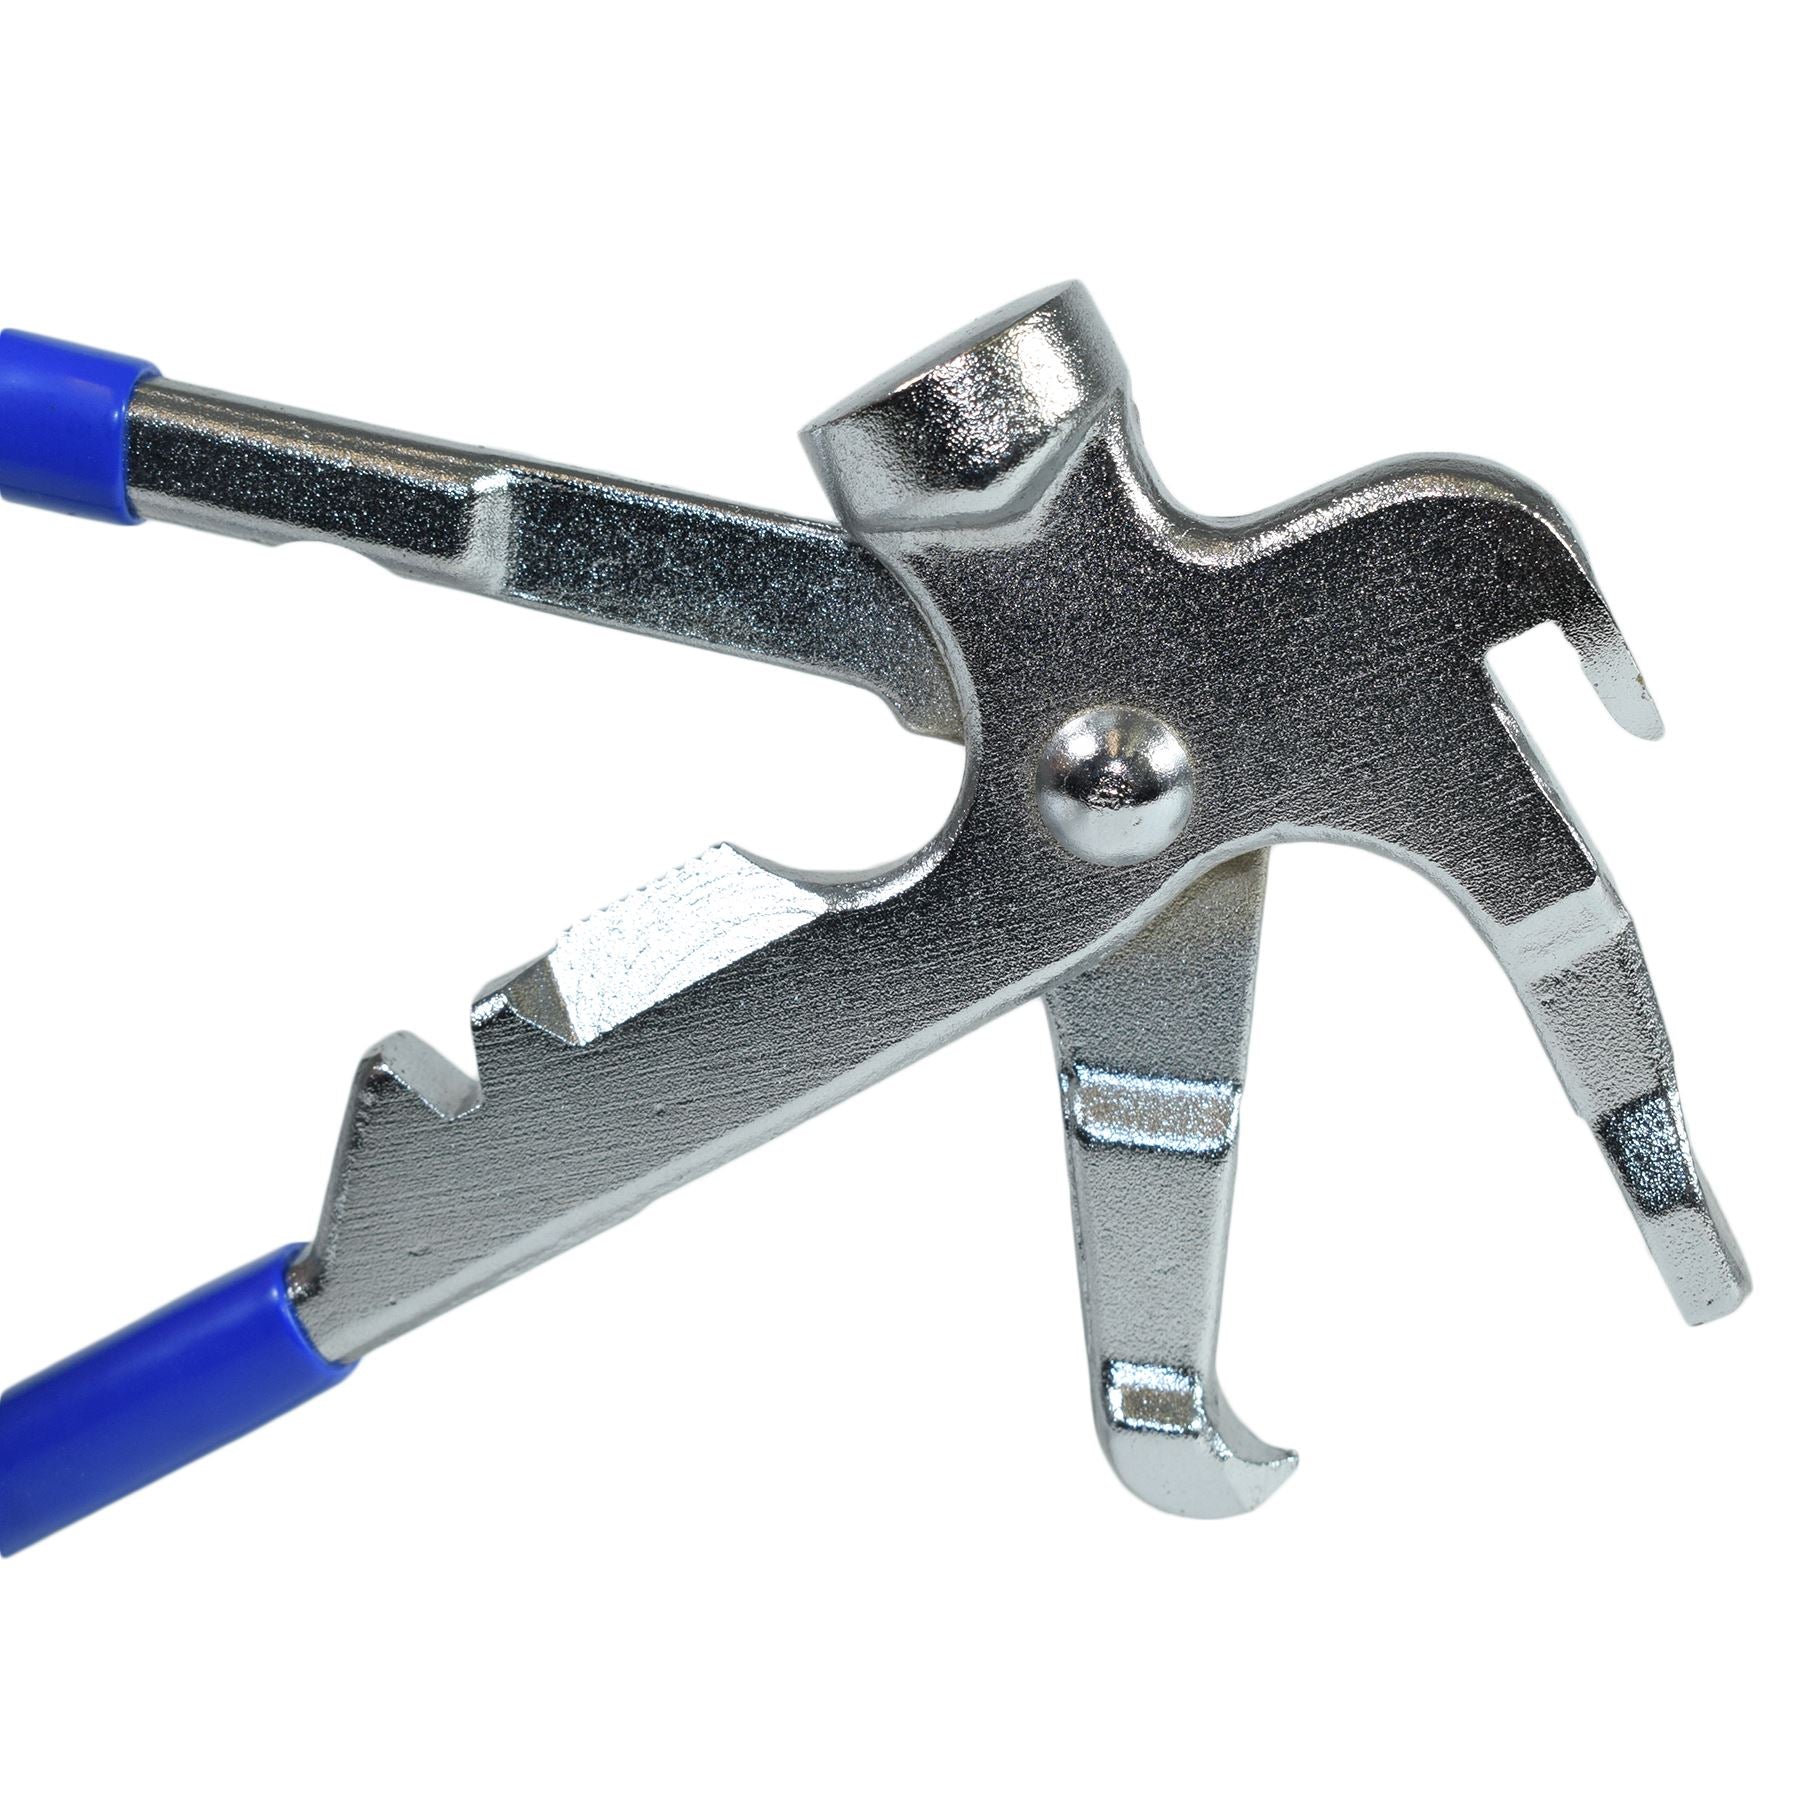 Wheel balance Weight Pliers Remover Removal Insert Lead Weights By Bergen